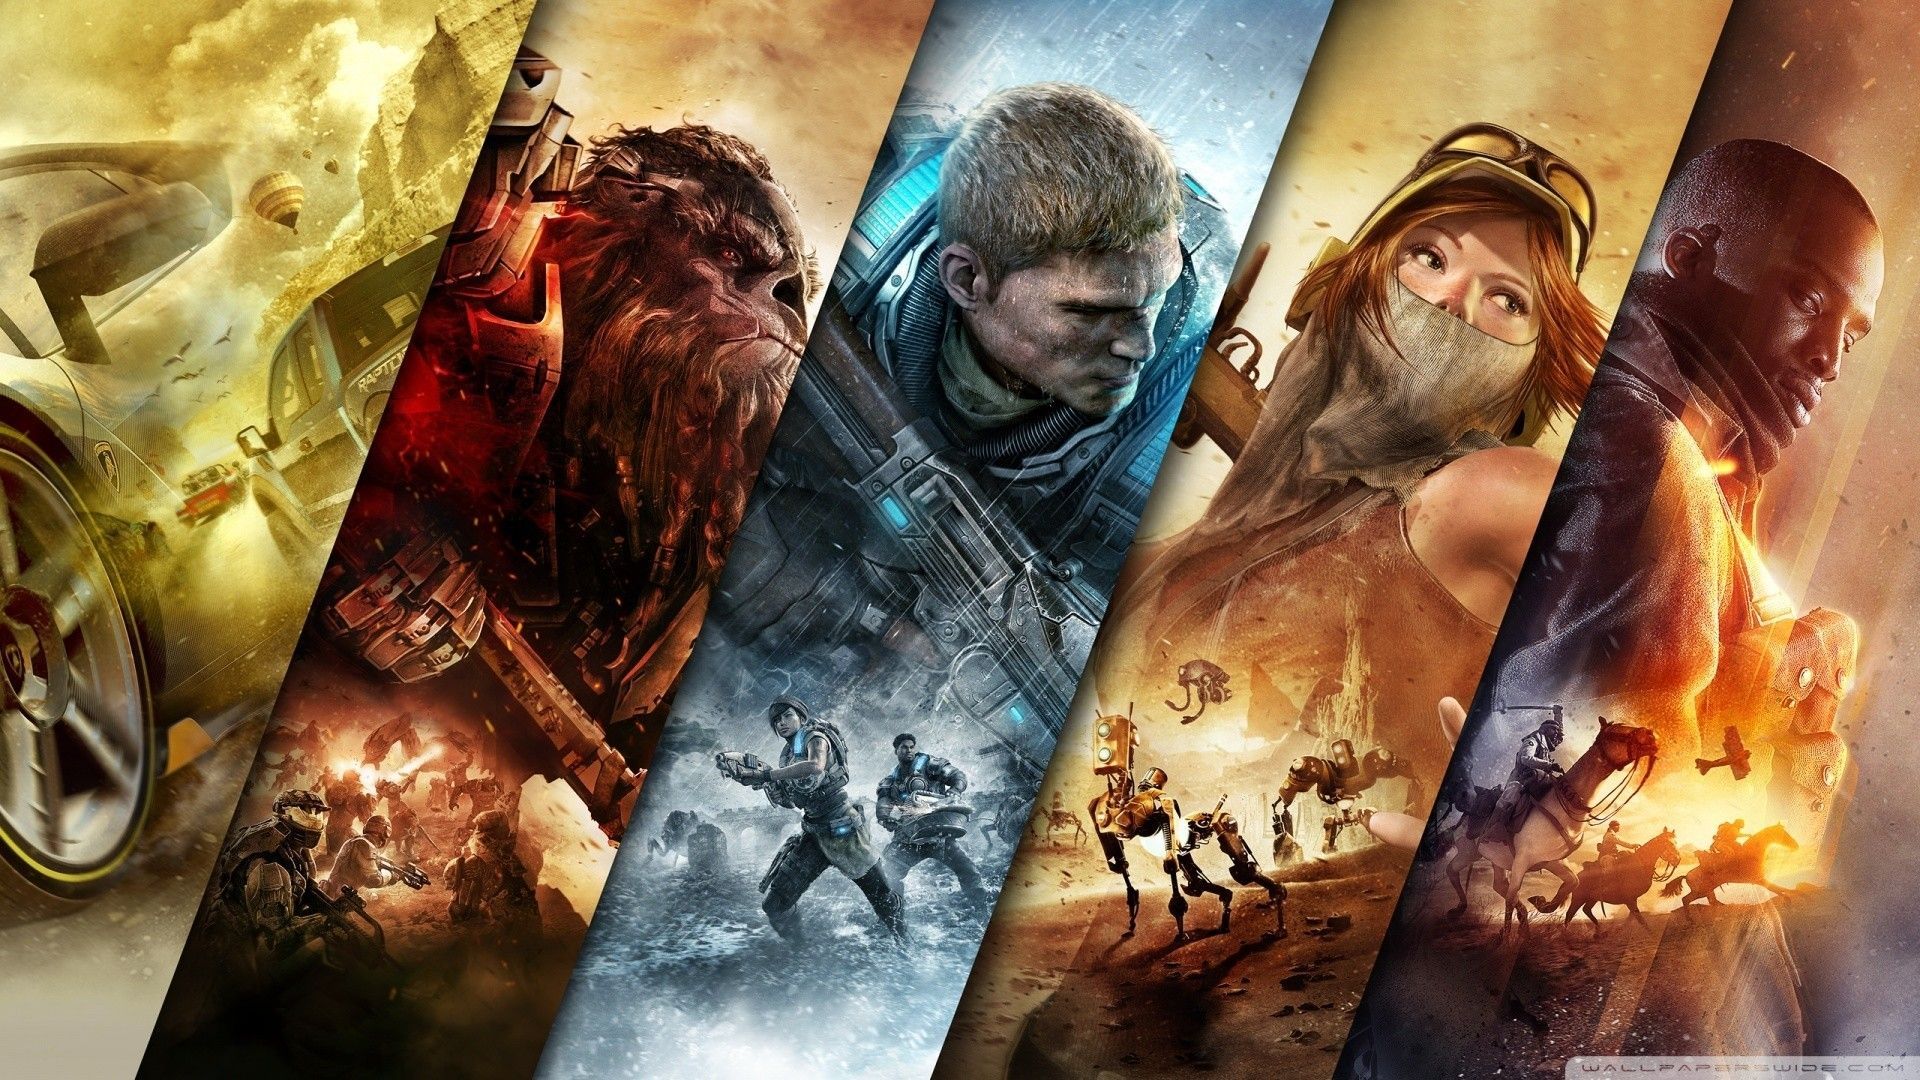 Best Video Games Wallpaper. Free xbox one games, Xbox one games, Xbox